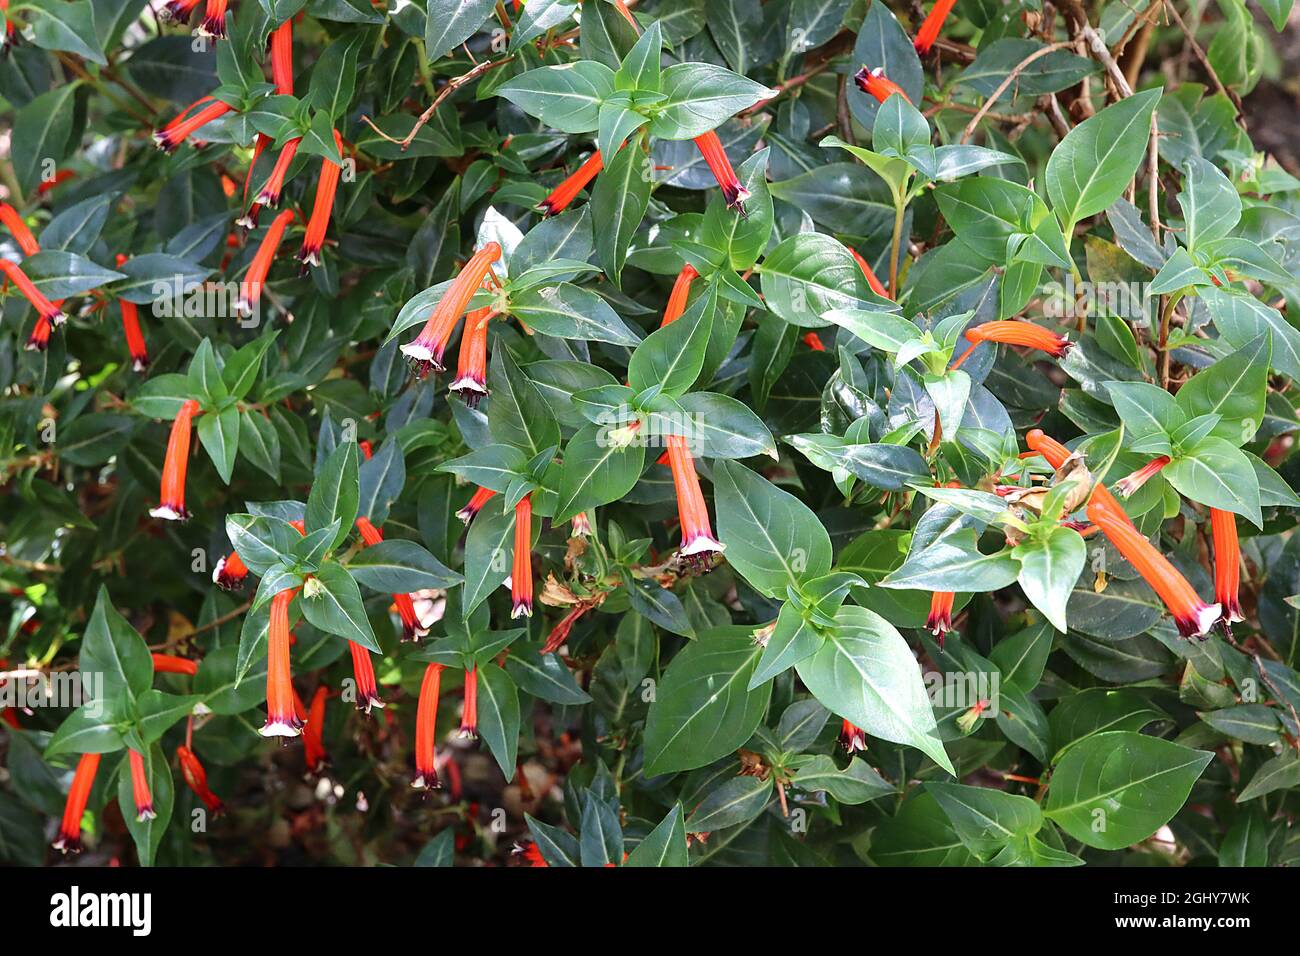 Cuphea ignea ‘Matchless’ cigar plant – tubular red orange flowers with purple black petal ends and white rim,  August, England, UK Stock Photo